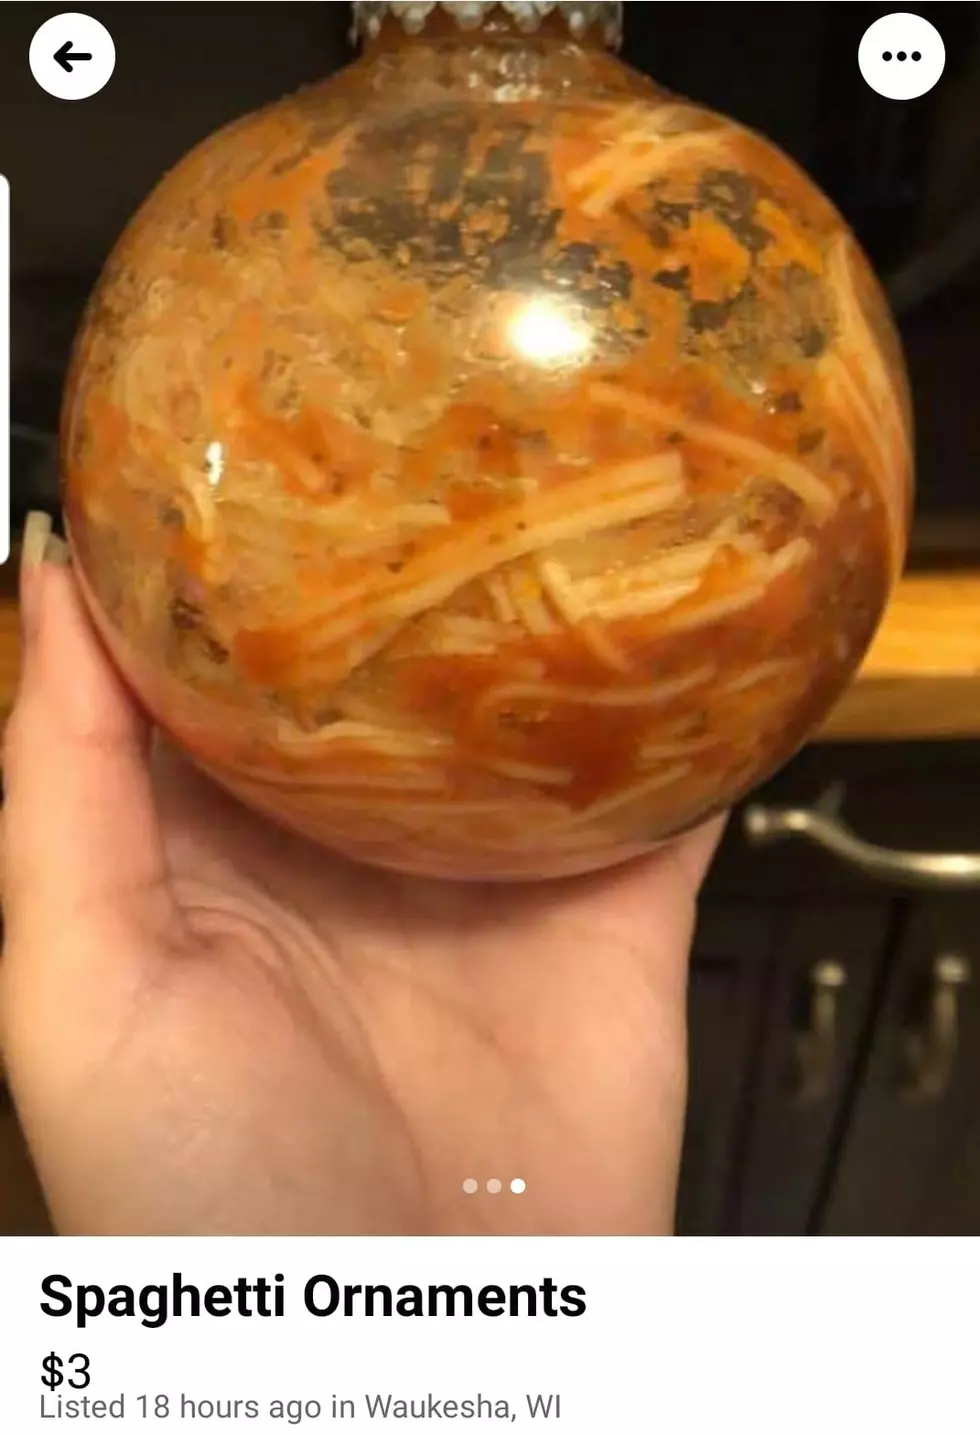 Wait is this Real? ‘Spaghetti Ornament’ For Sale in Wisconsin